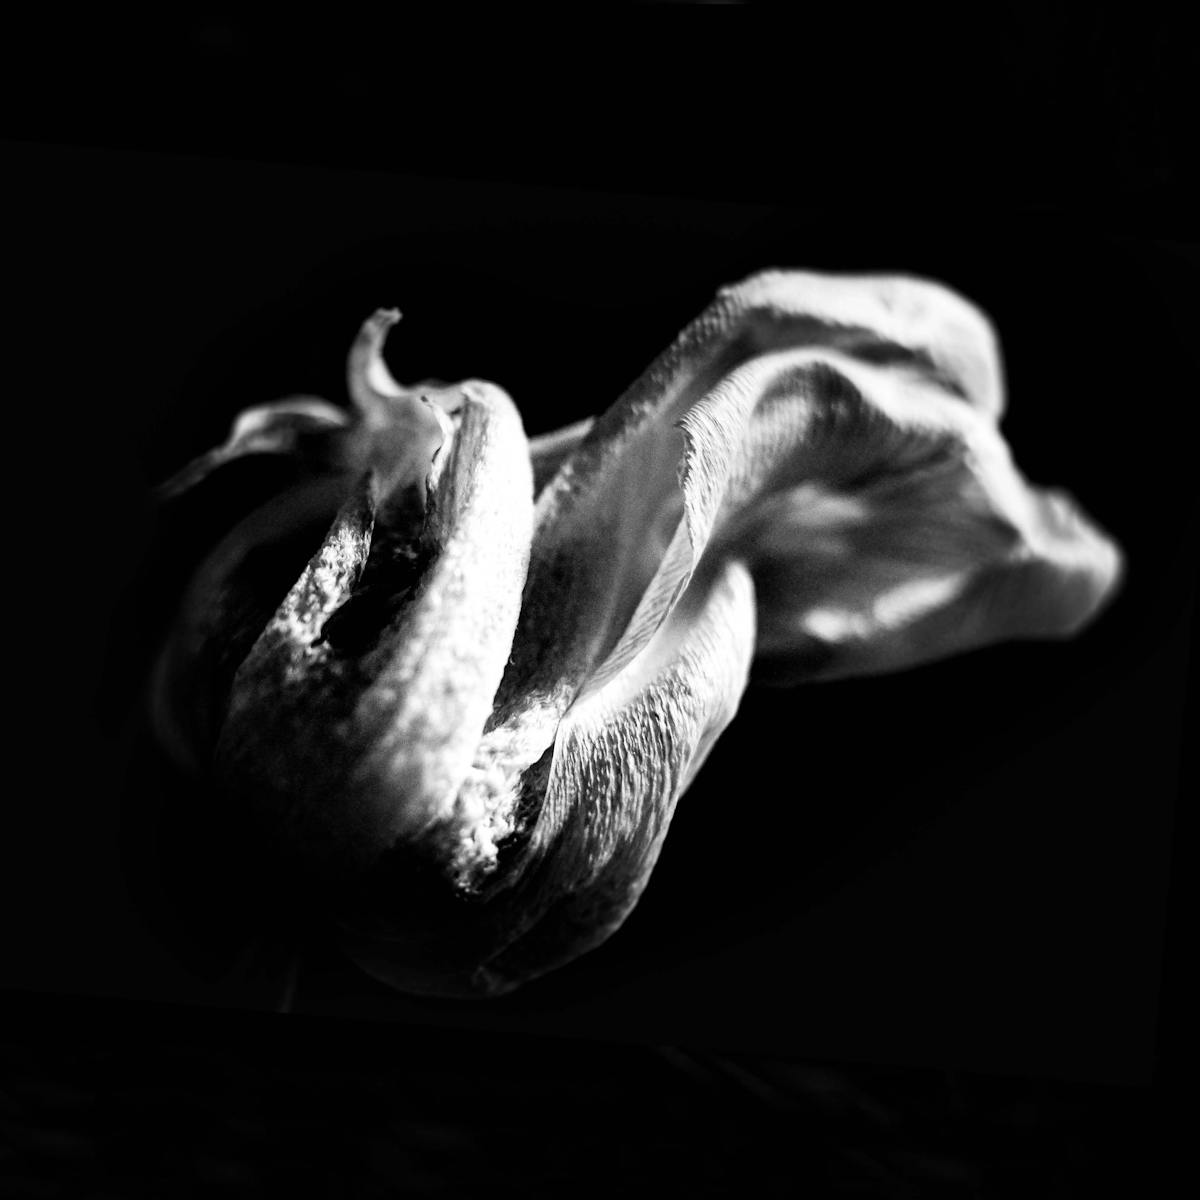 a photograph of tulip flower bud dried